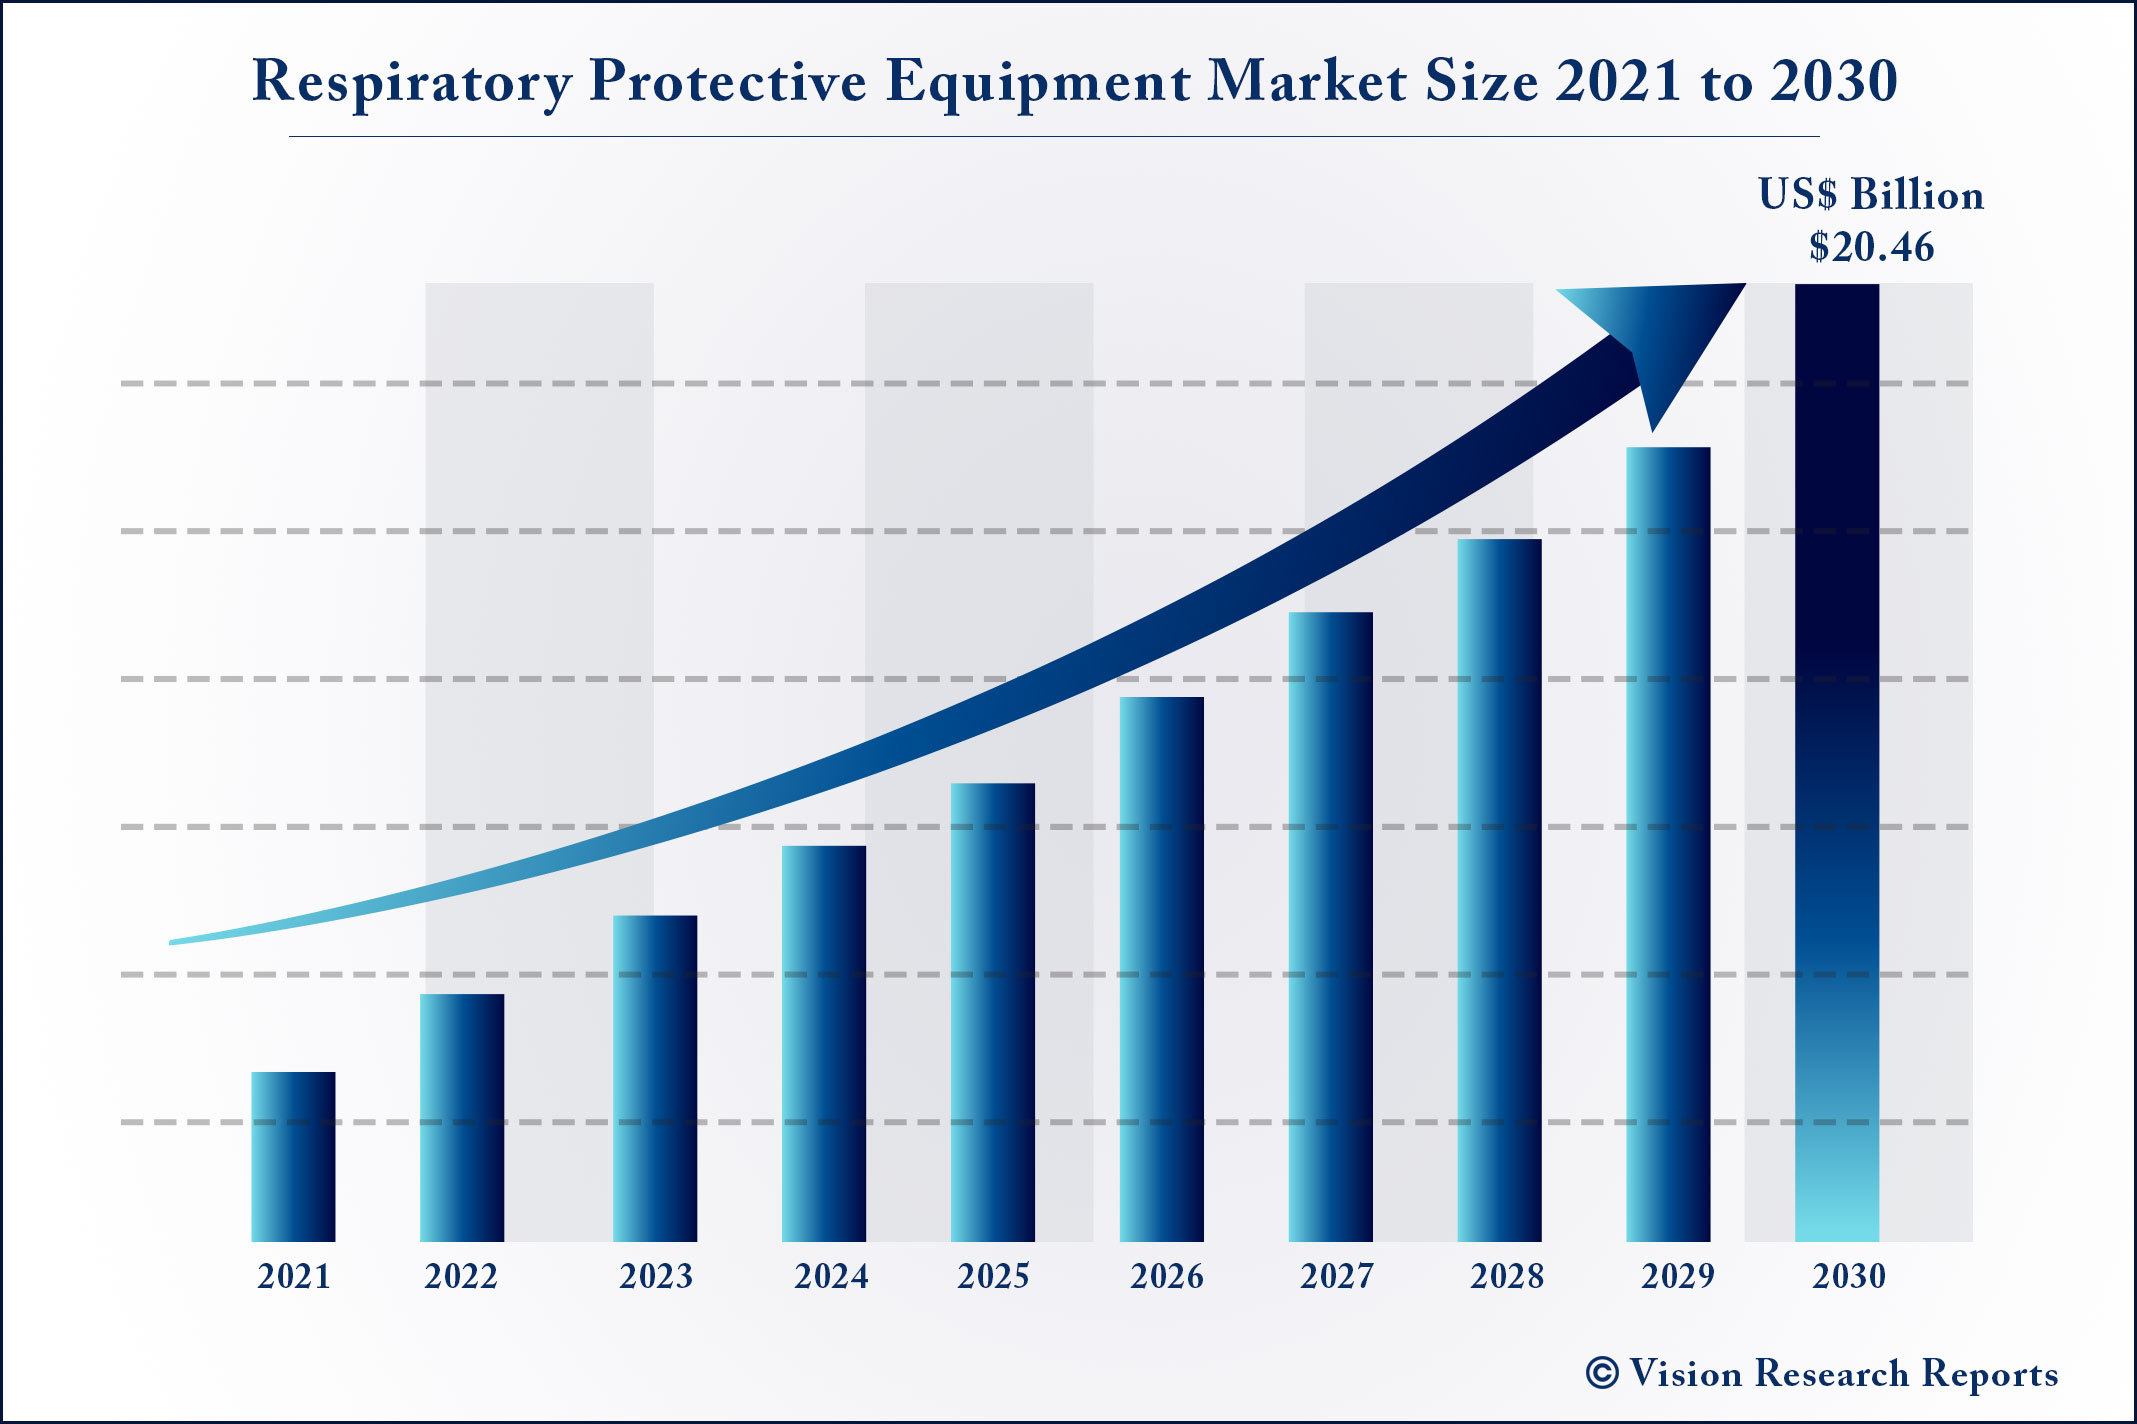 Respiratory Protective Equipment Market Size 2021 to 2030